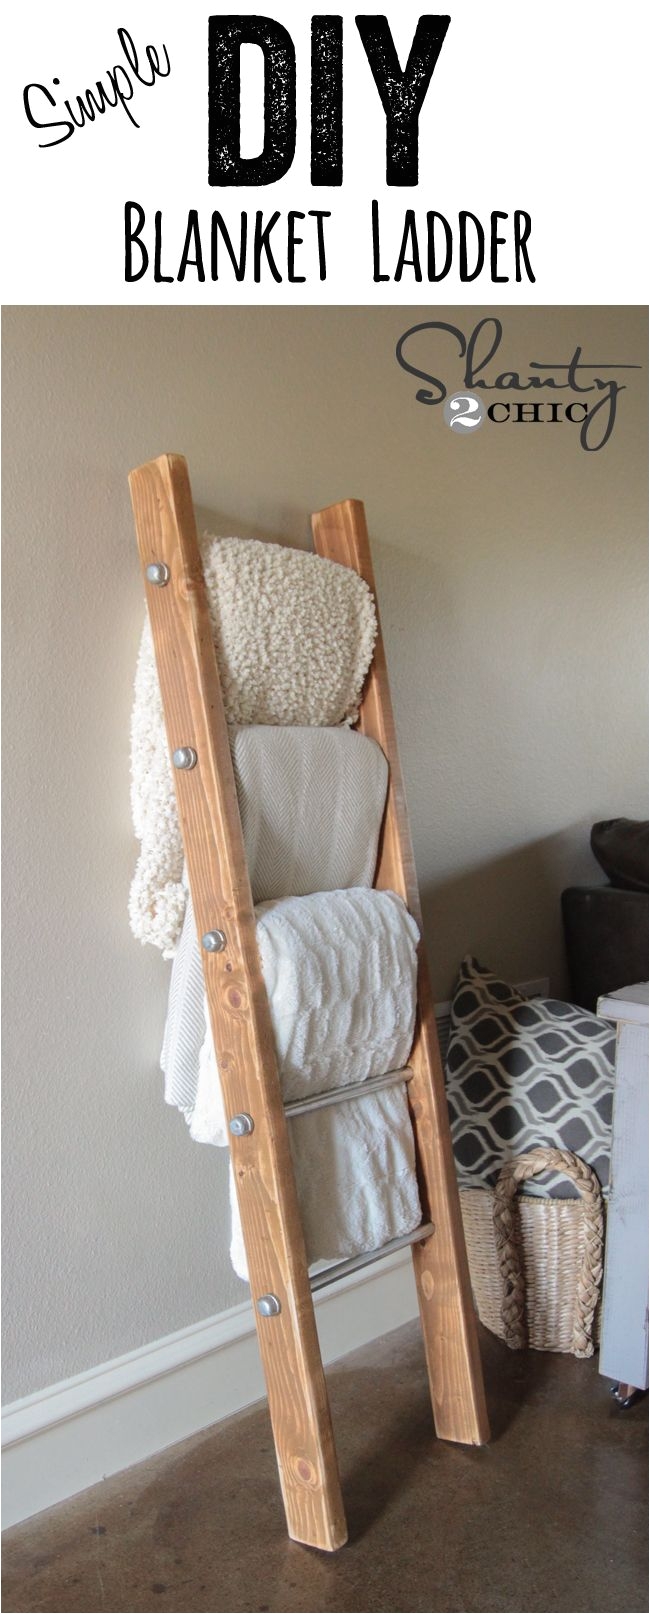 diy wood and metal pipe blanket ladder seriously so simple and so cute www shanty 2 chic com